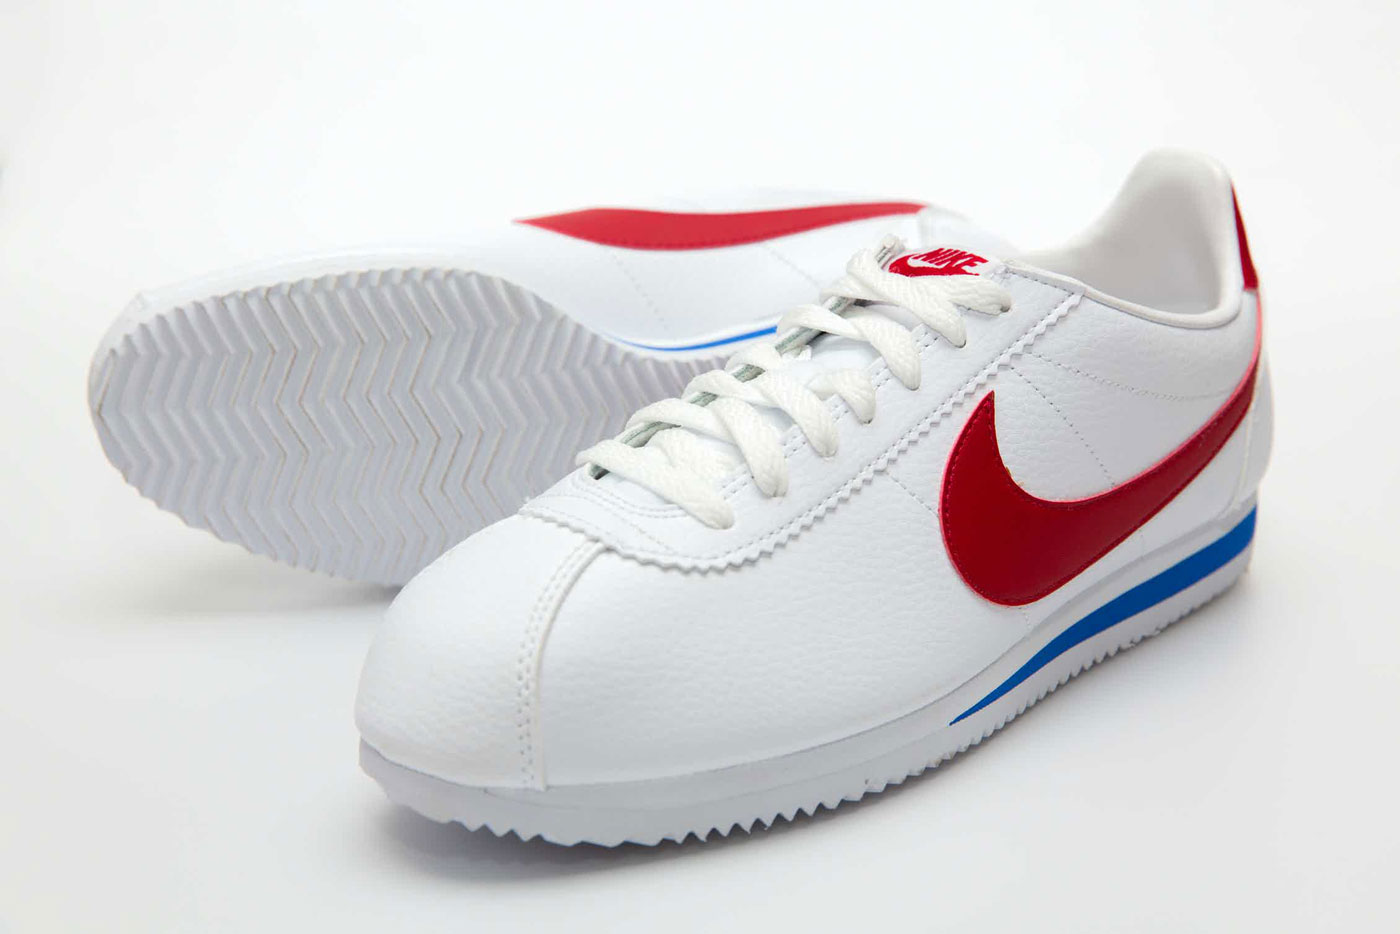 History of Sneakers - The Cortez is Nike’s original running shoe, designed by co-founder Bill Bowerman and released in 1972.